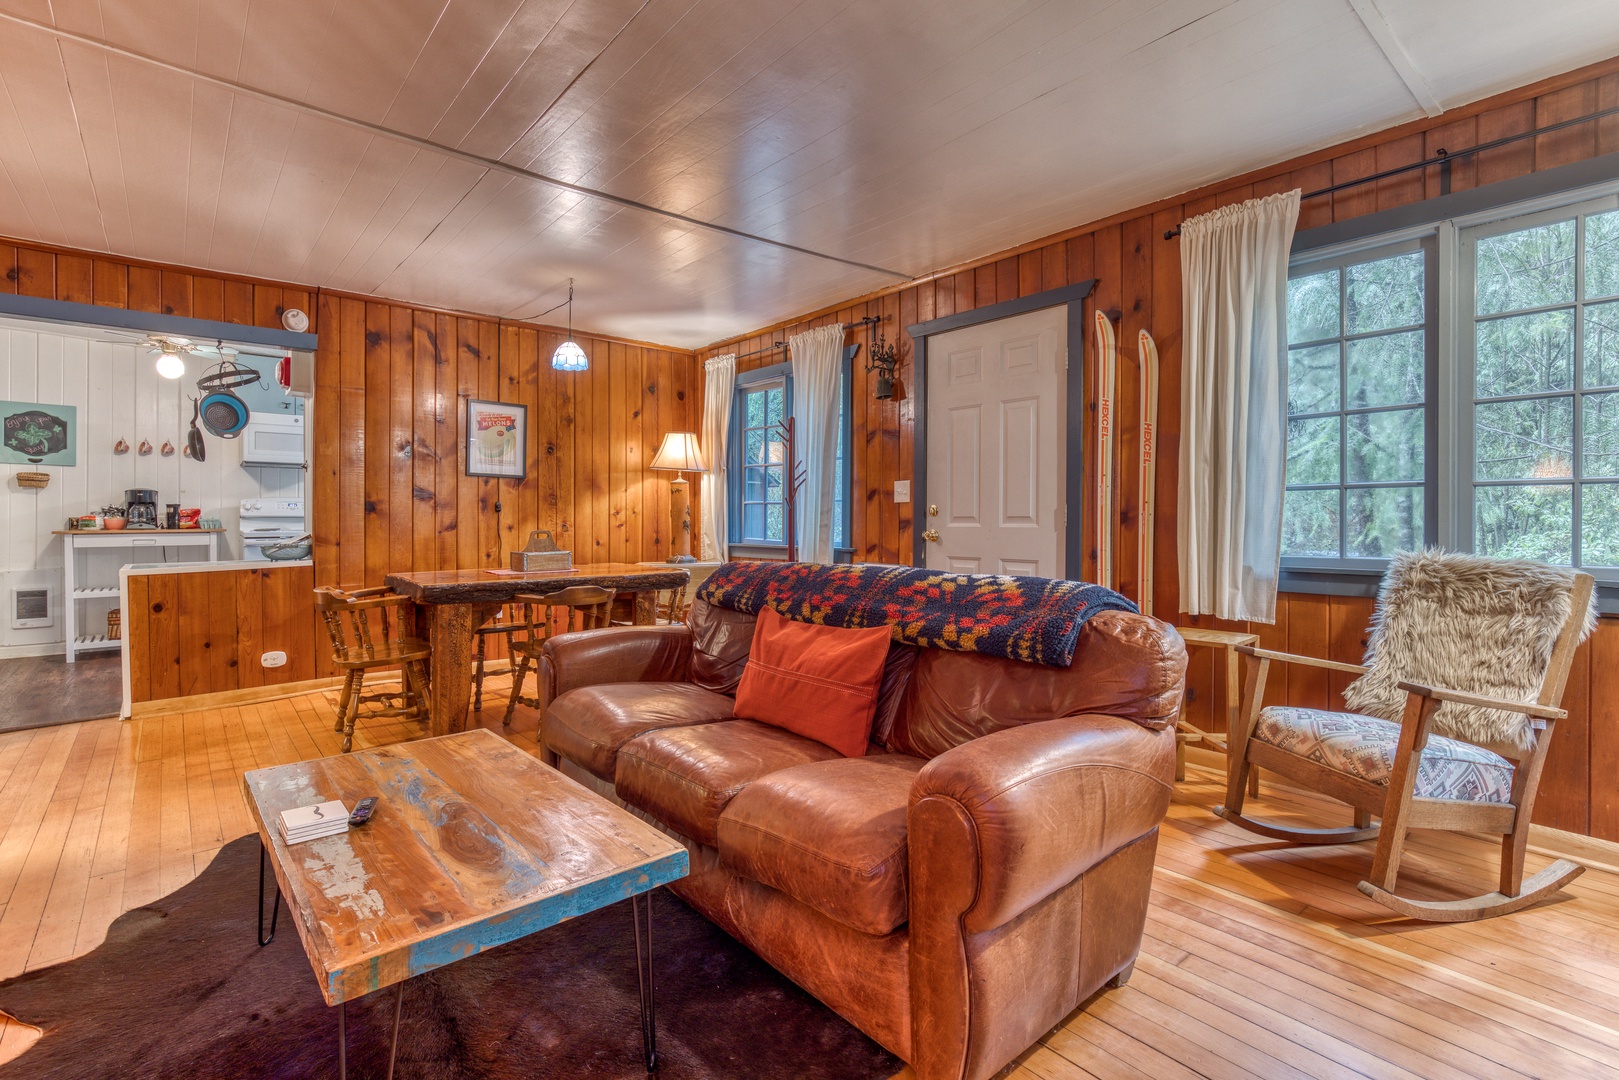 Brightwood Vacation Rentals, Springbrook Cabin - Step back in time as you enter the cabin into the open-concept common area.